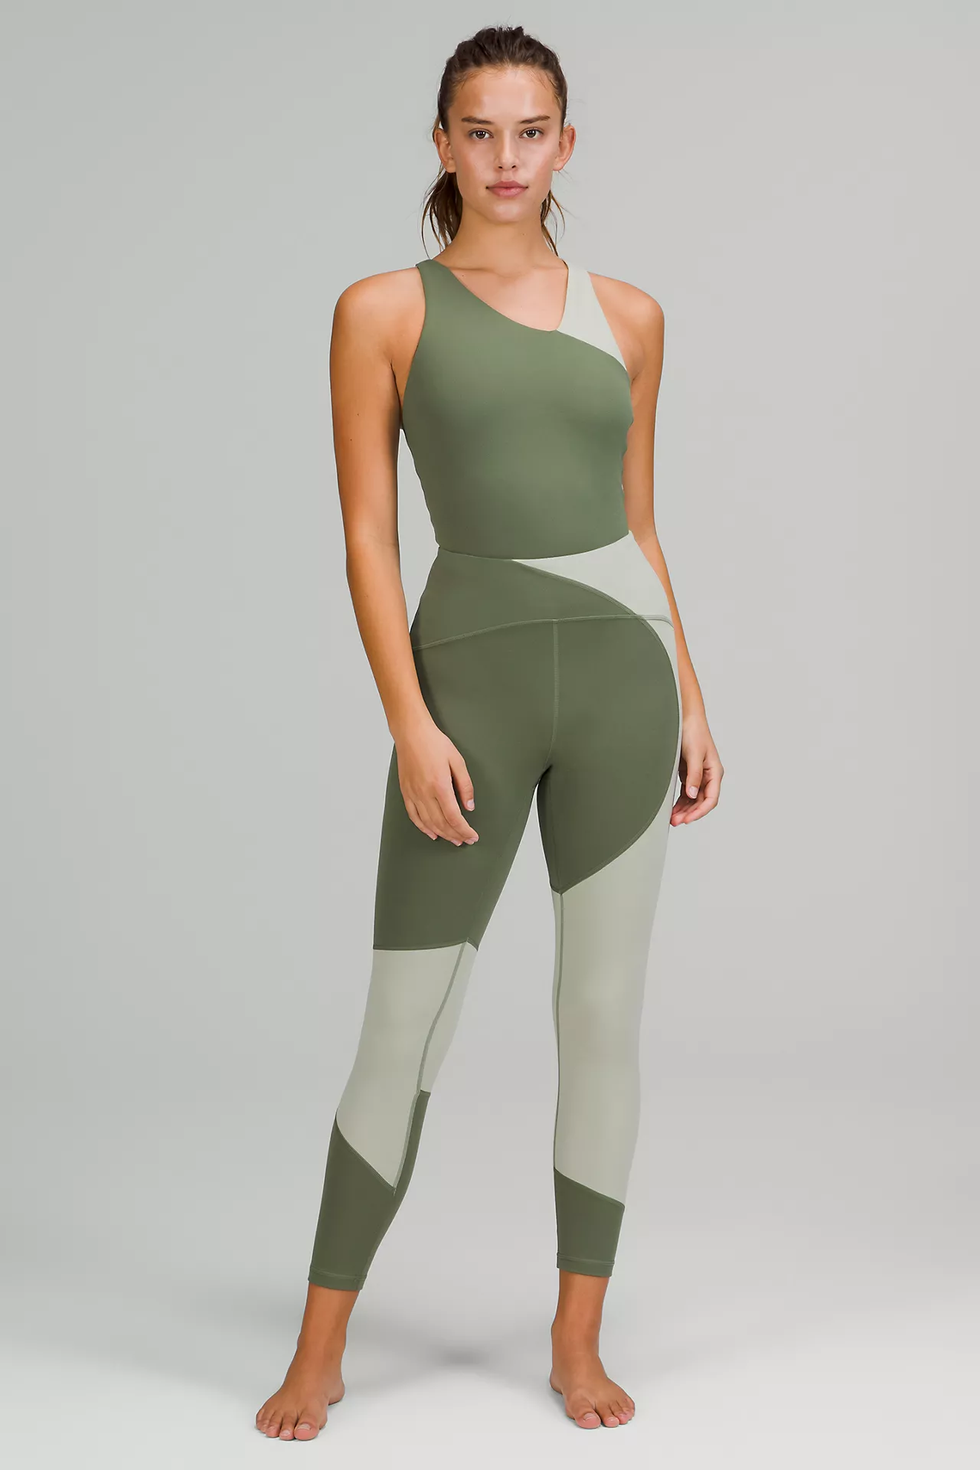 Yoga Backless Ribbed Jumpsuit for Women - One Piece Sleeveless Workout  Bodysuit, Gym Jumpsuit for Pilates